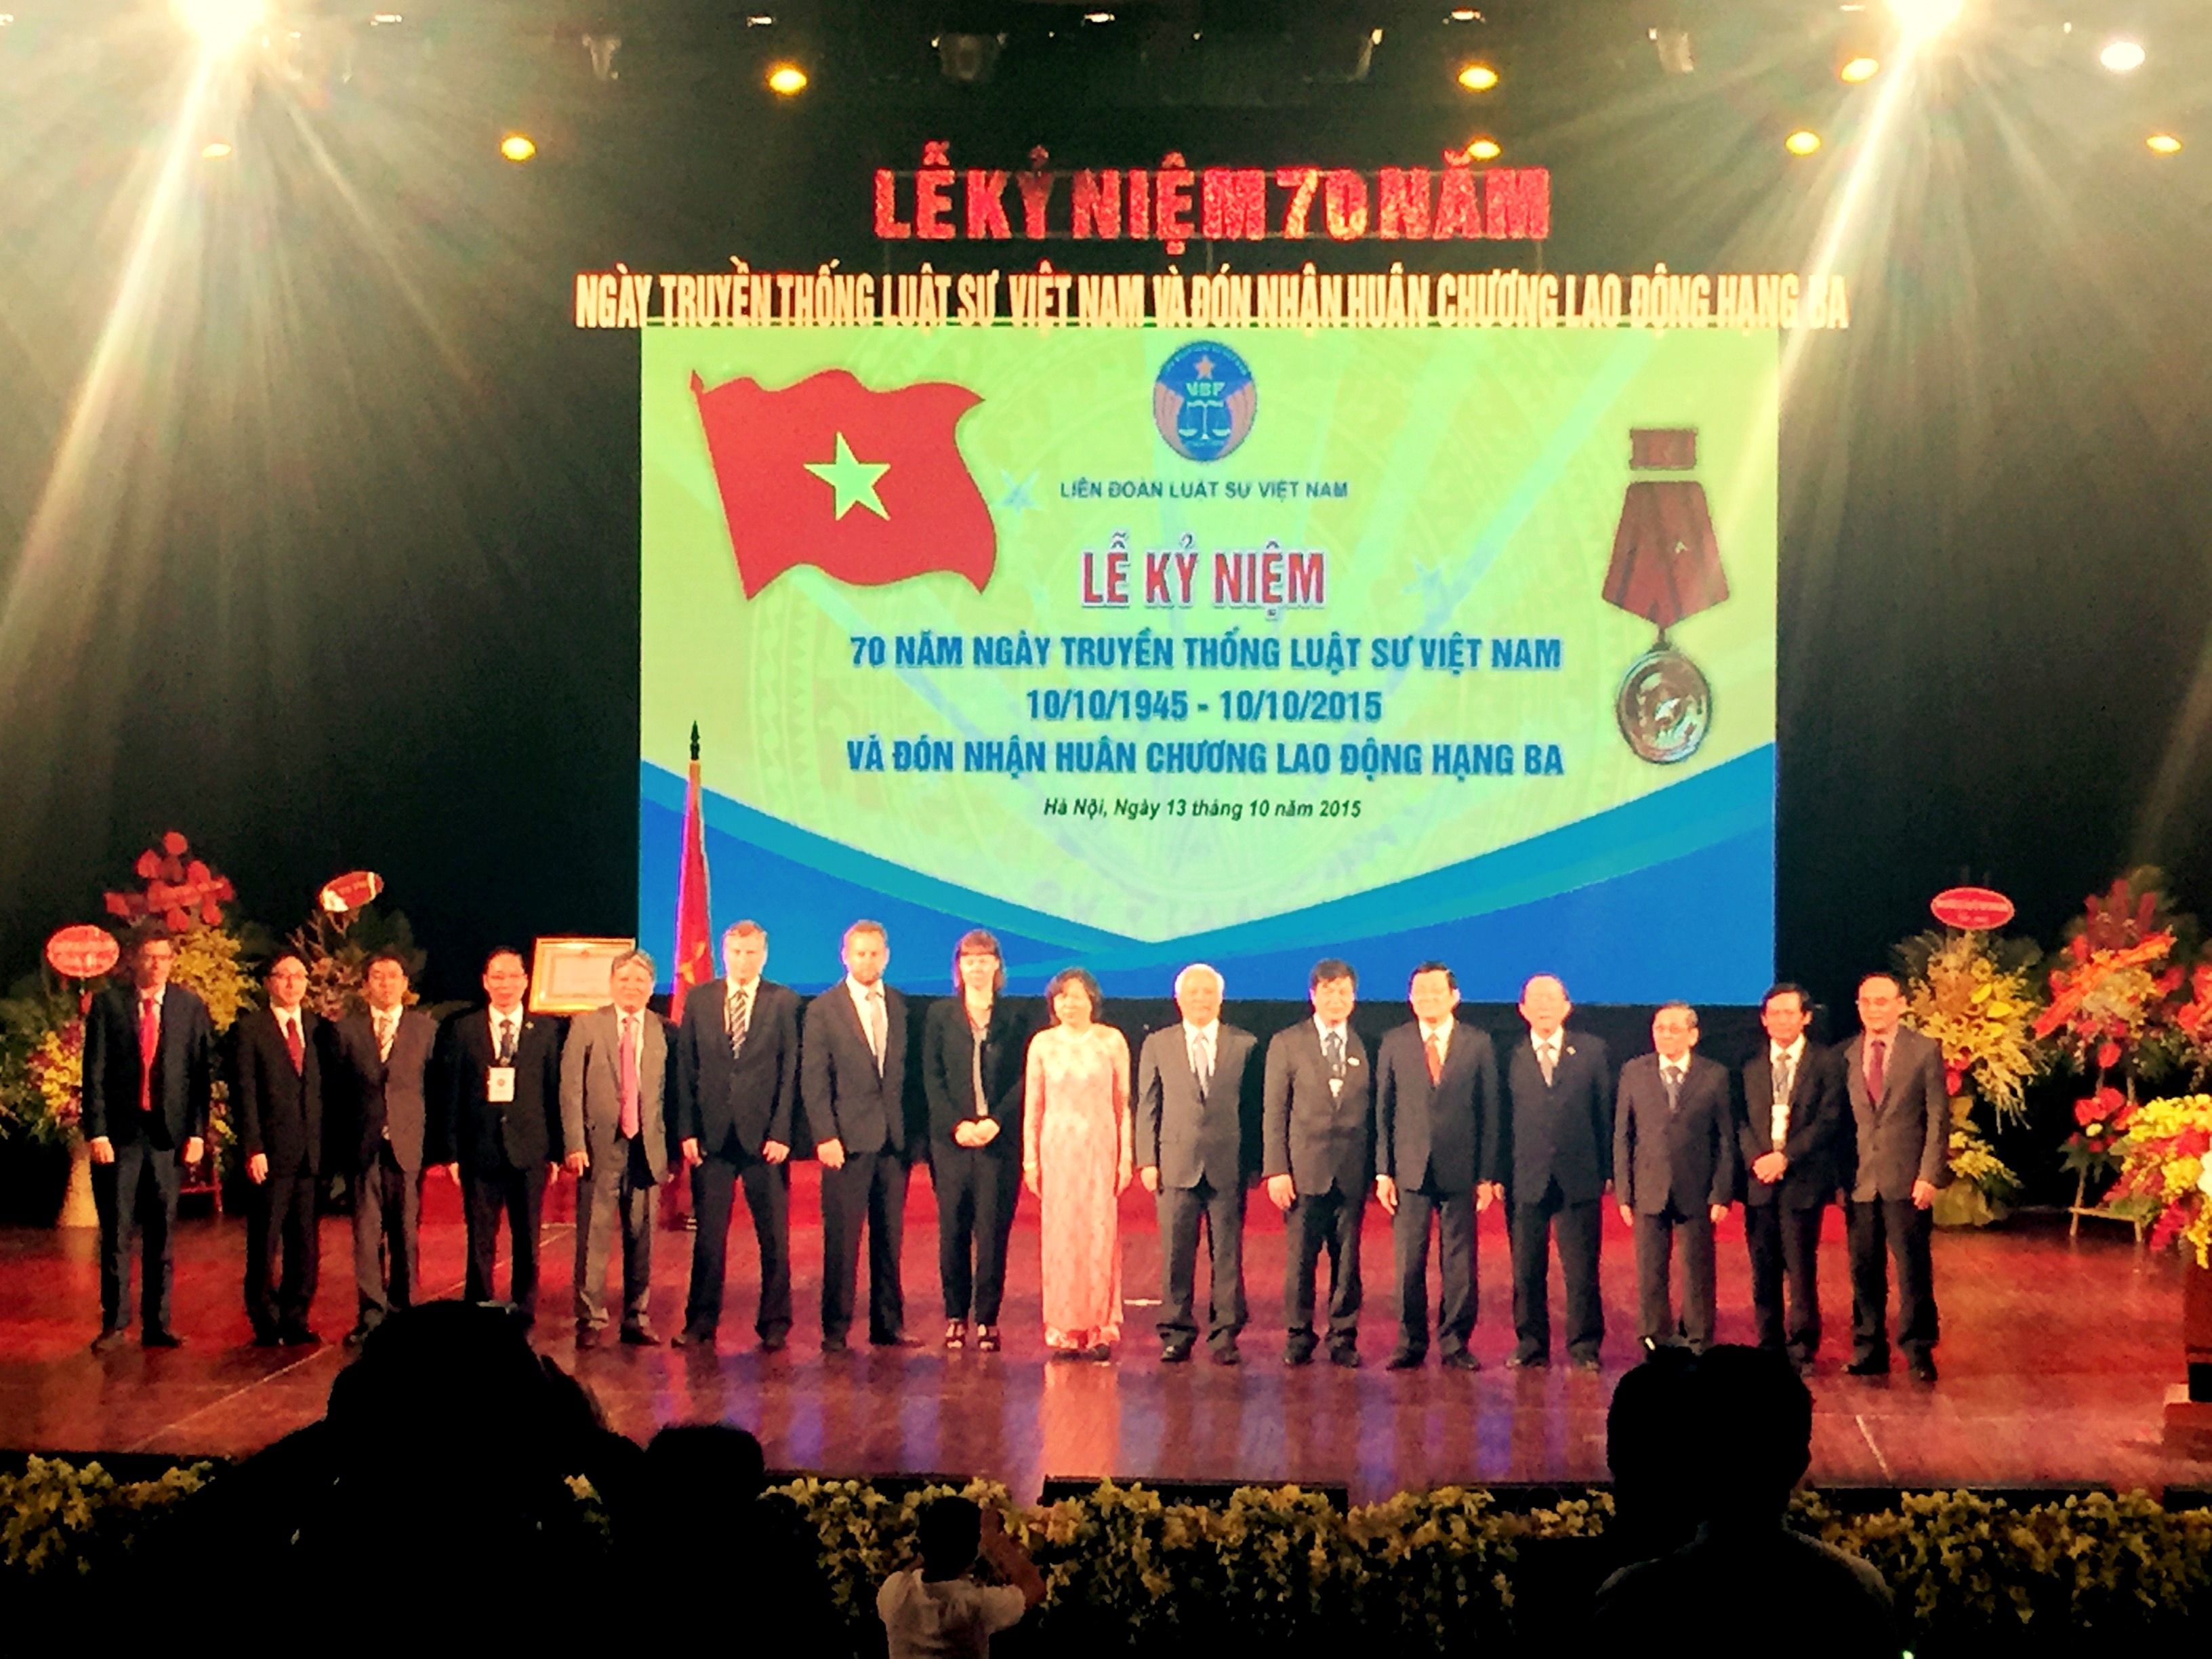 Ms. Vu Thi Thu Ha participated in the 70th Anniversary of Vietnamese Lawyers’ Traditional Day